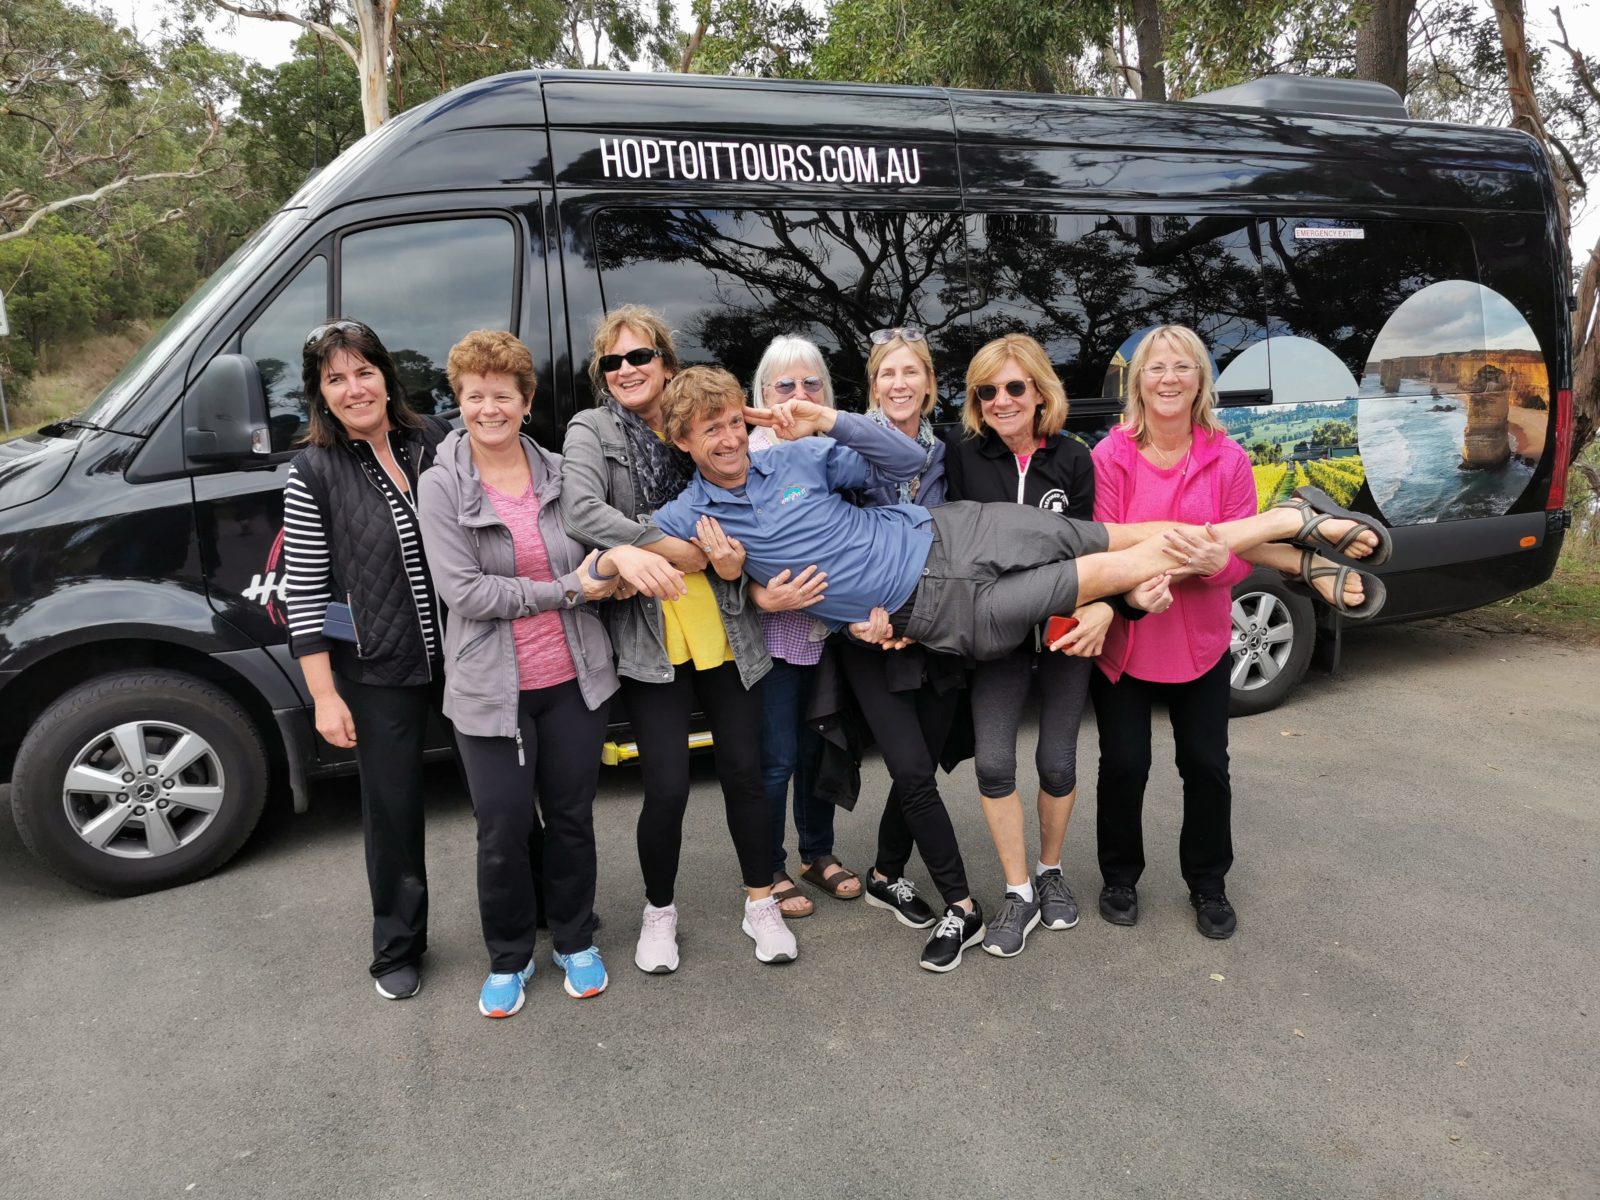 Private tour group with Hop To It Tours bus